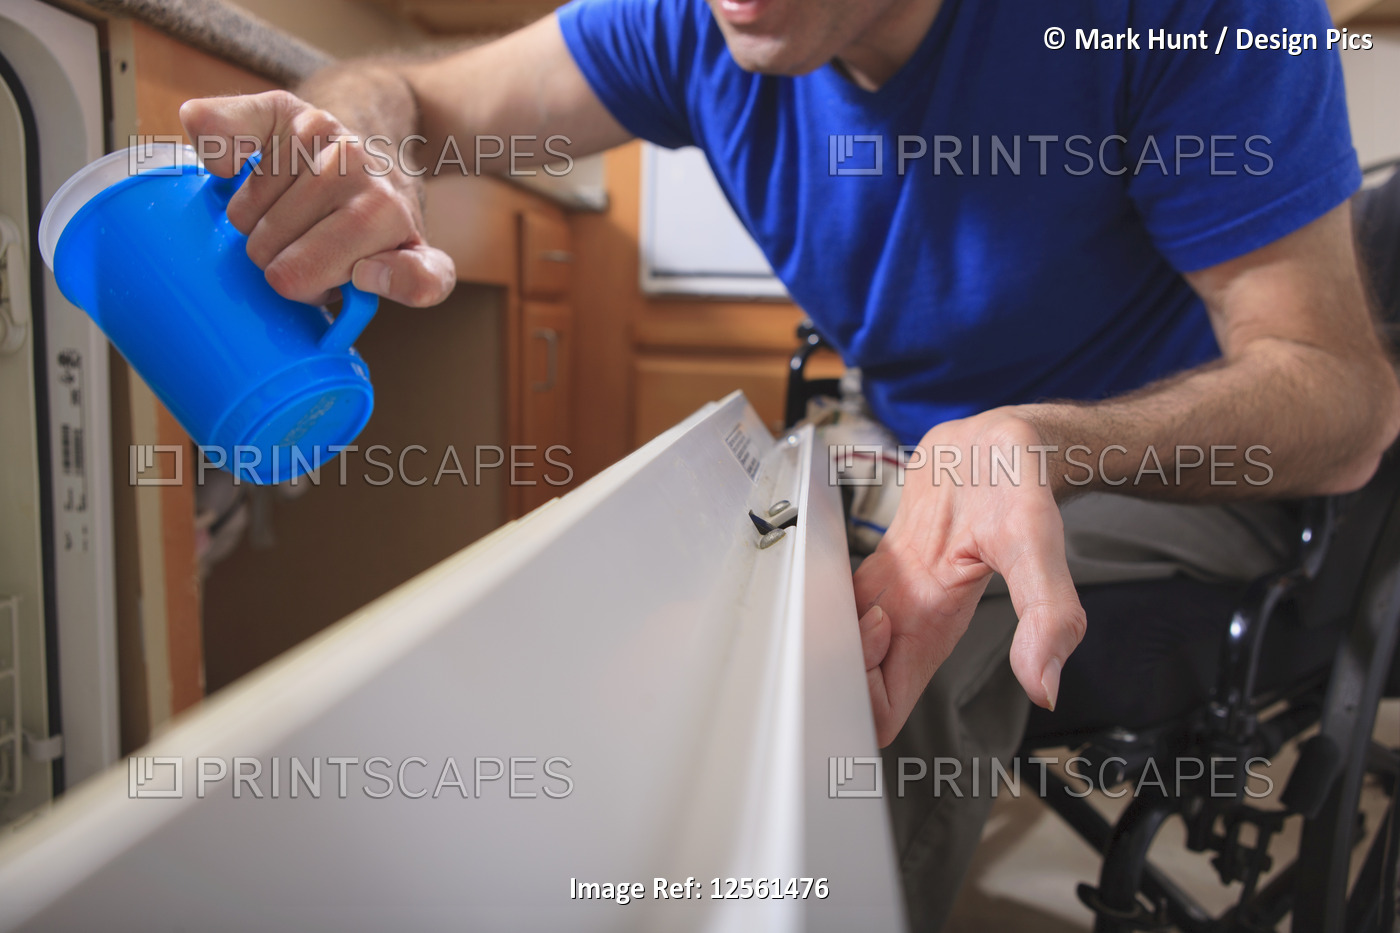 Man with Friedreich's Ataxia and deformed hands using his dishwasher